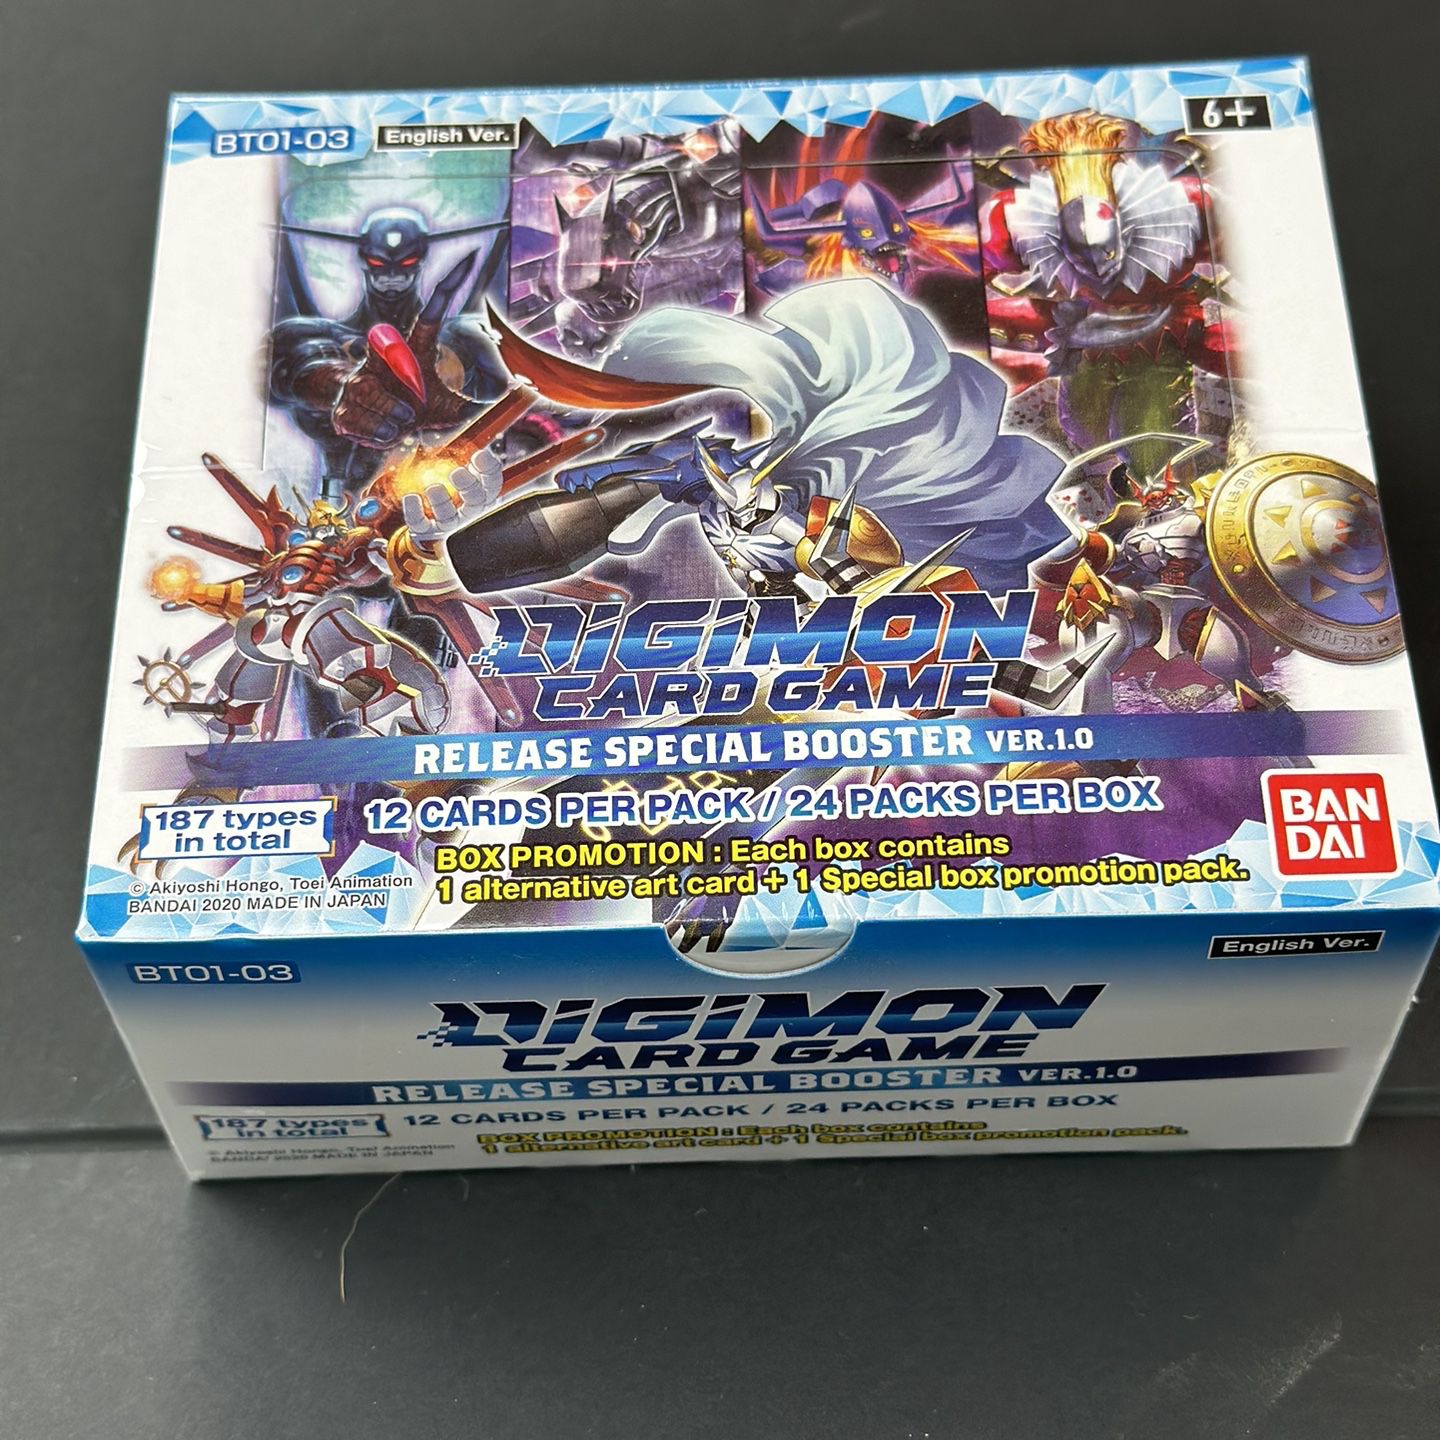 Digimon Card Game Booster Box Ver.1.0